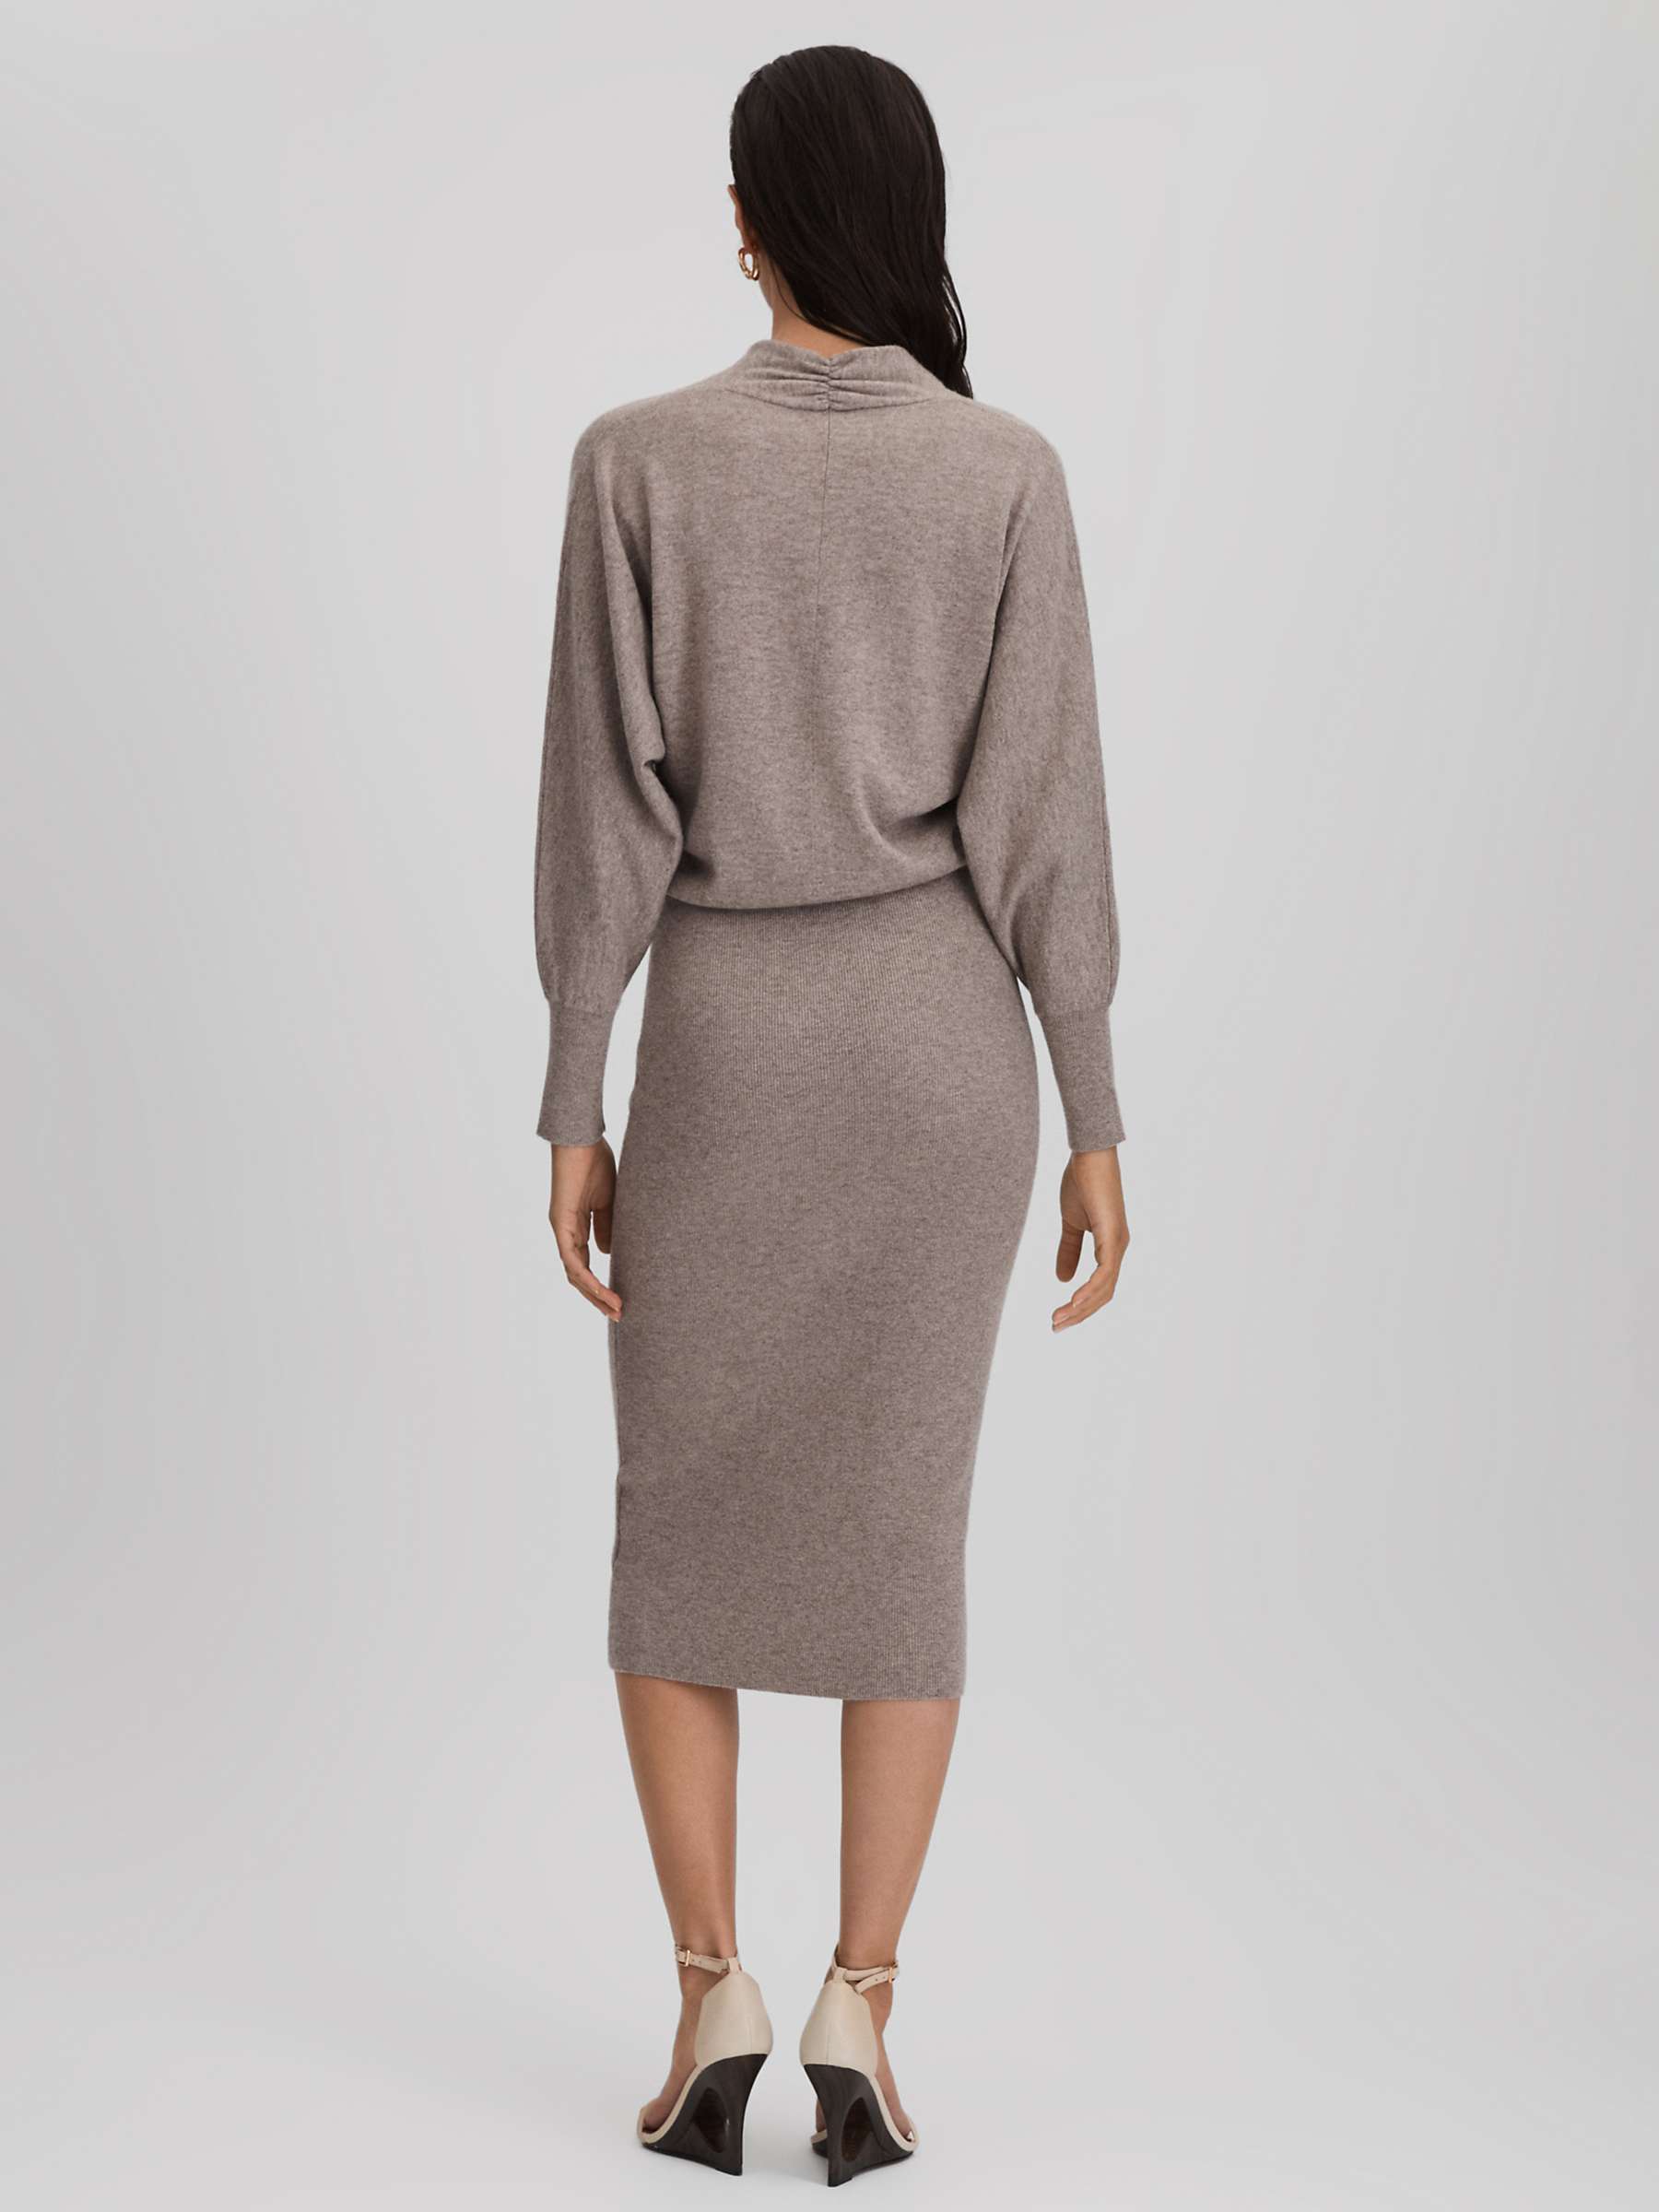 Buy Reiss Sally Wool and Cashmere Jumper Dress Online at johnlewis.com